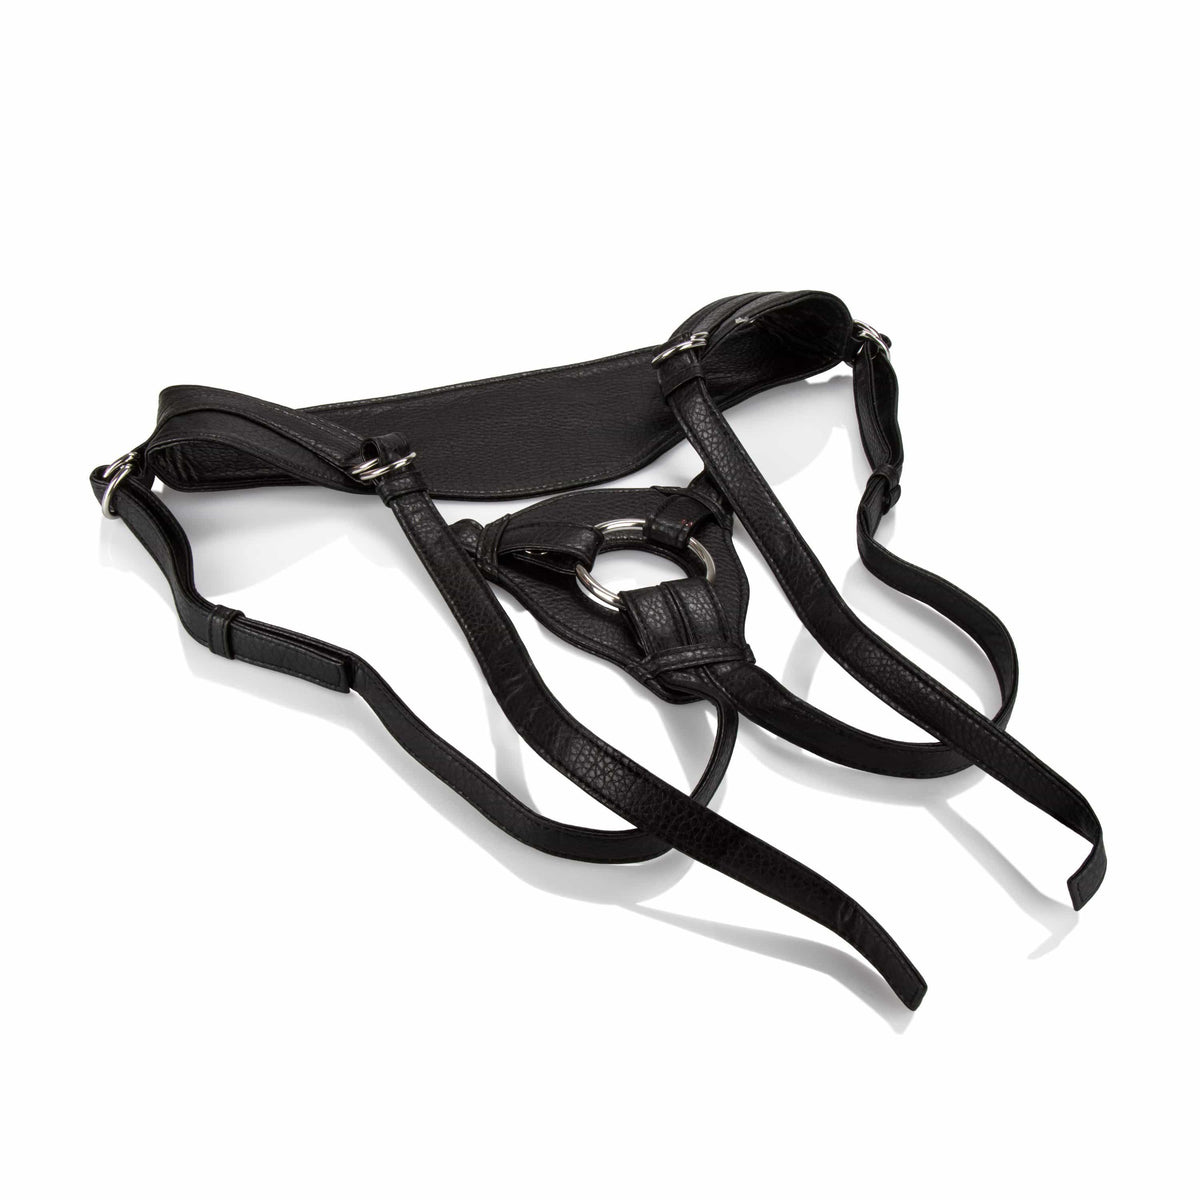 California Exotics - Her Royal Harness The Queen Strap On (Black)    Strap On w/o Dildo